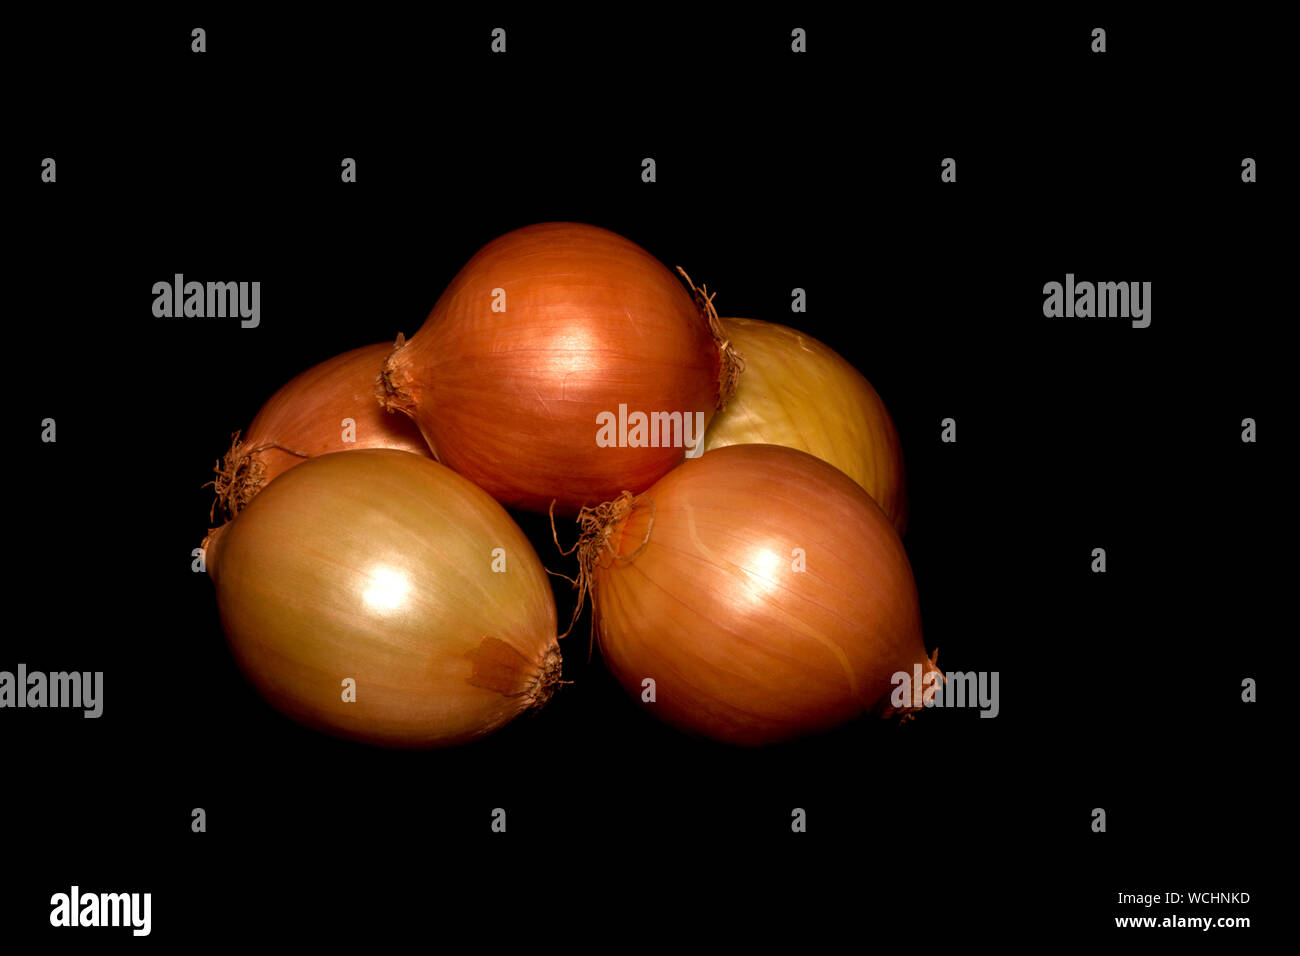 Golden onions classically lit against a black background Stock Photo